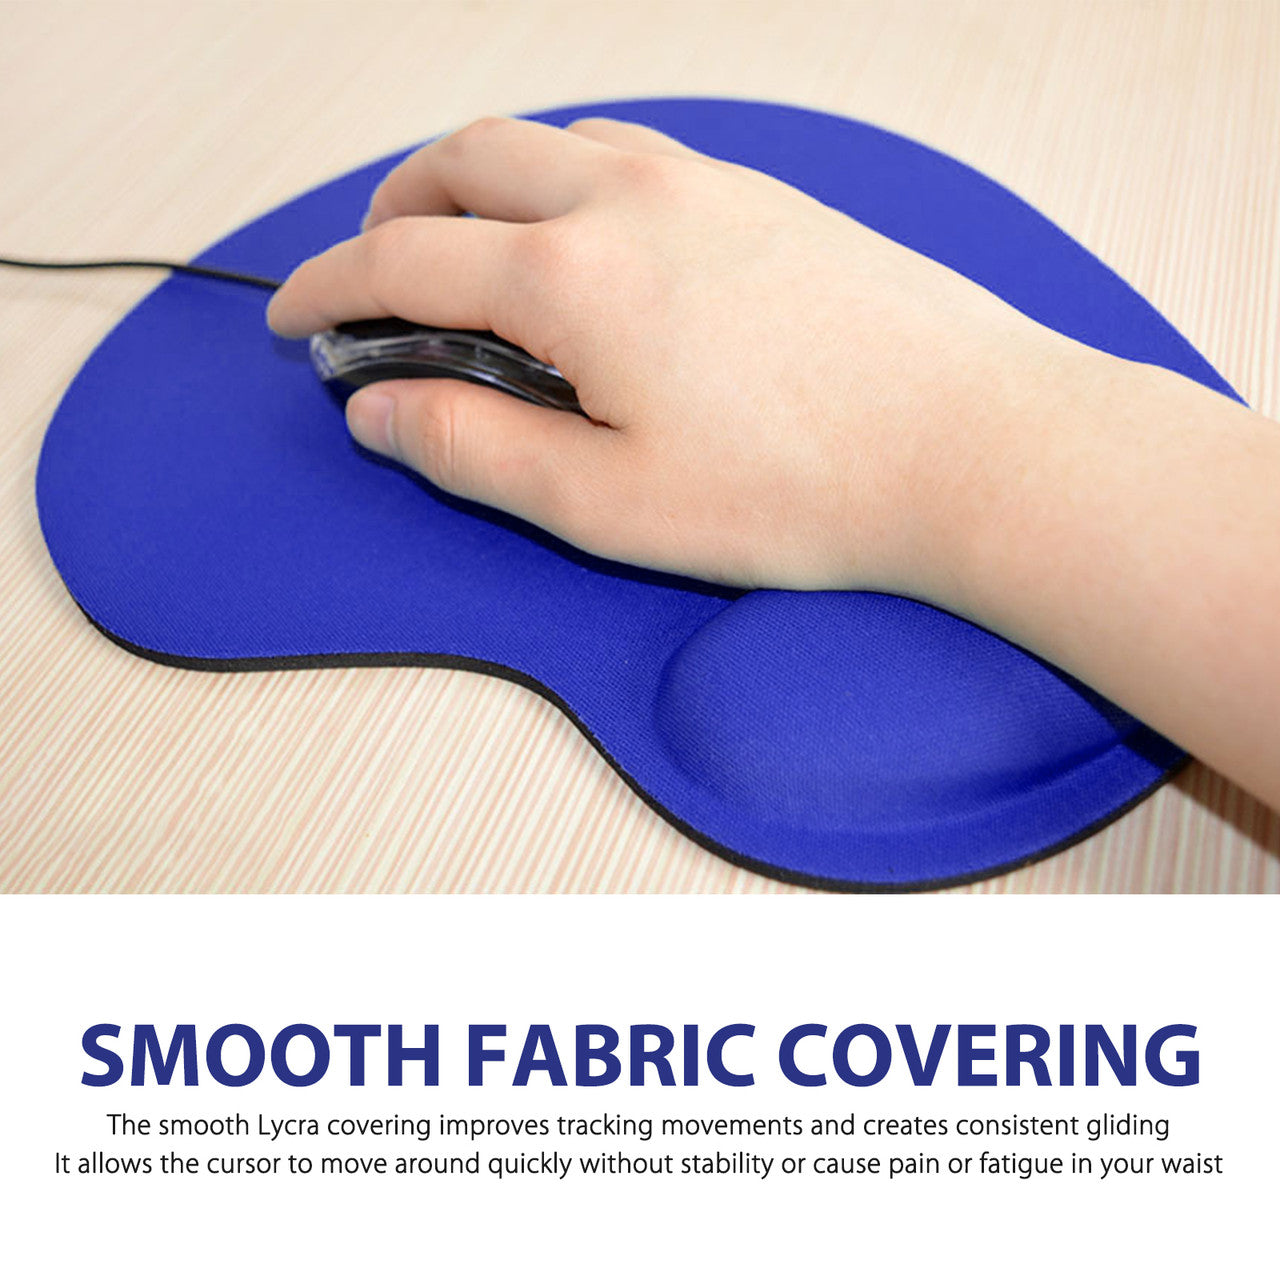 Mouse Pad, Ergonomic Mouse Pad with Wrist Rest Support, PU Gaming Mouse Pad, Non-Slip PU Base for Computer, Laptop, Home, Office & Travel, Blue